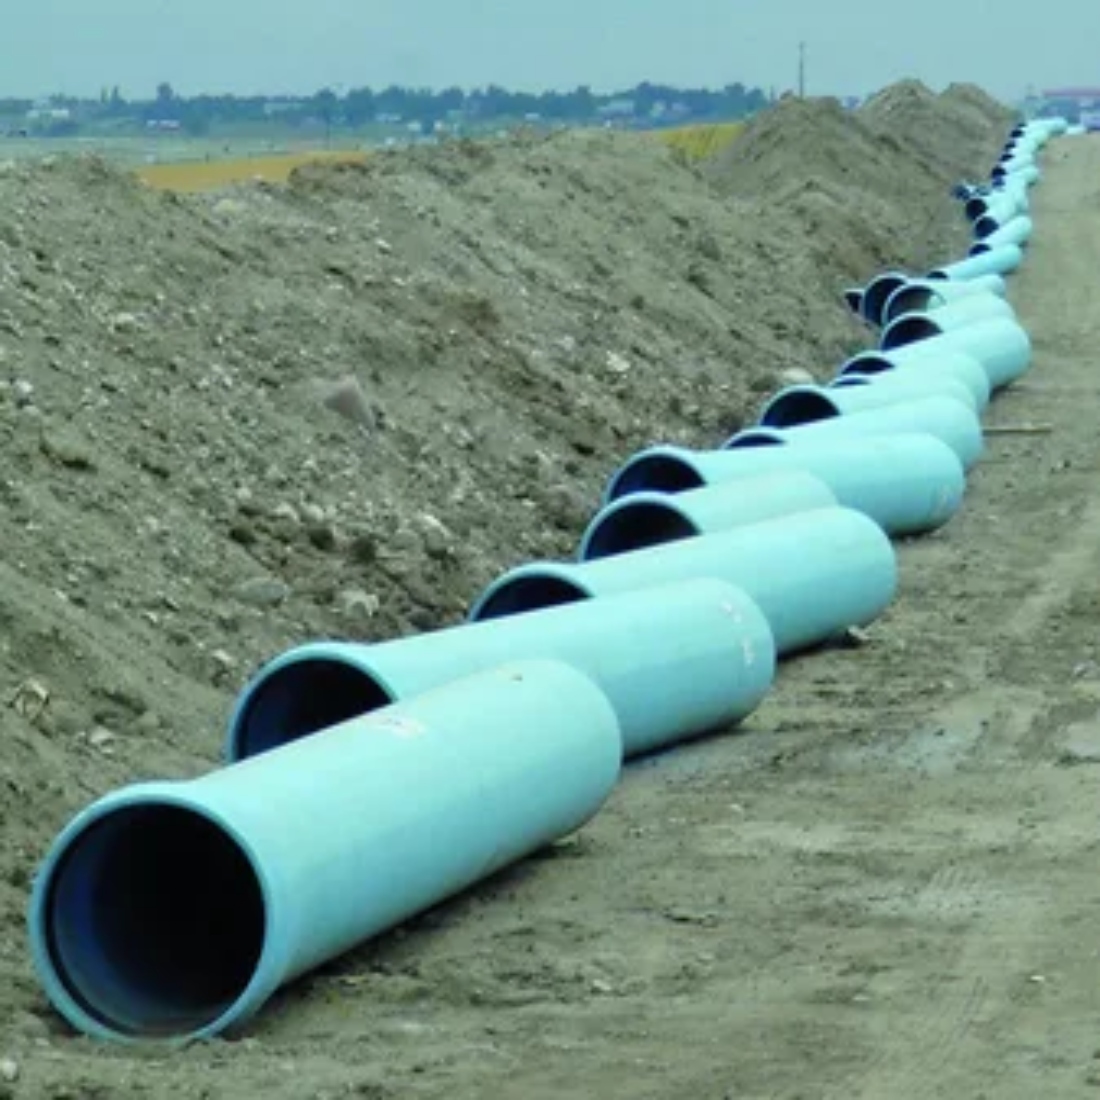 thermoplastic pipe